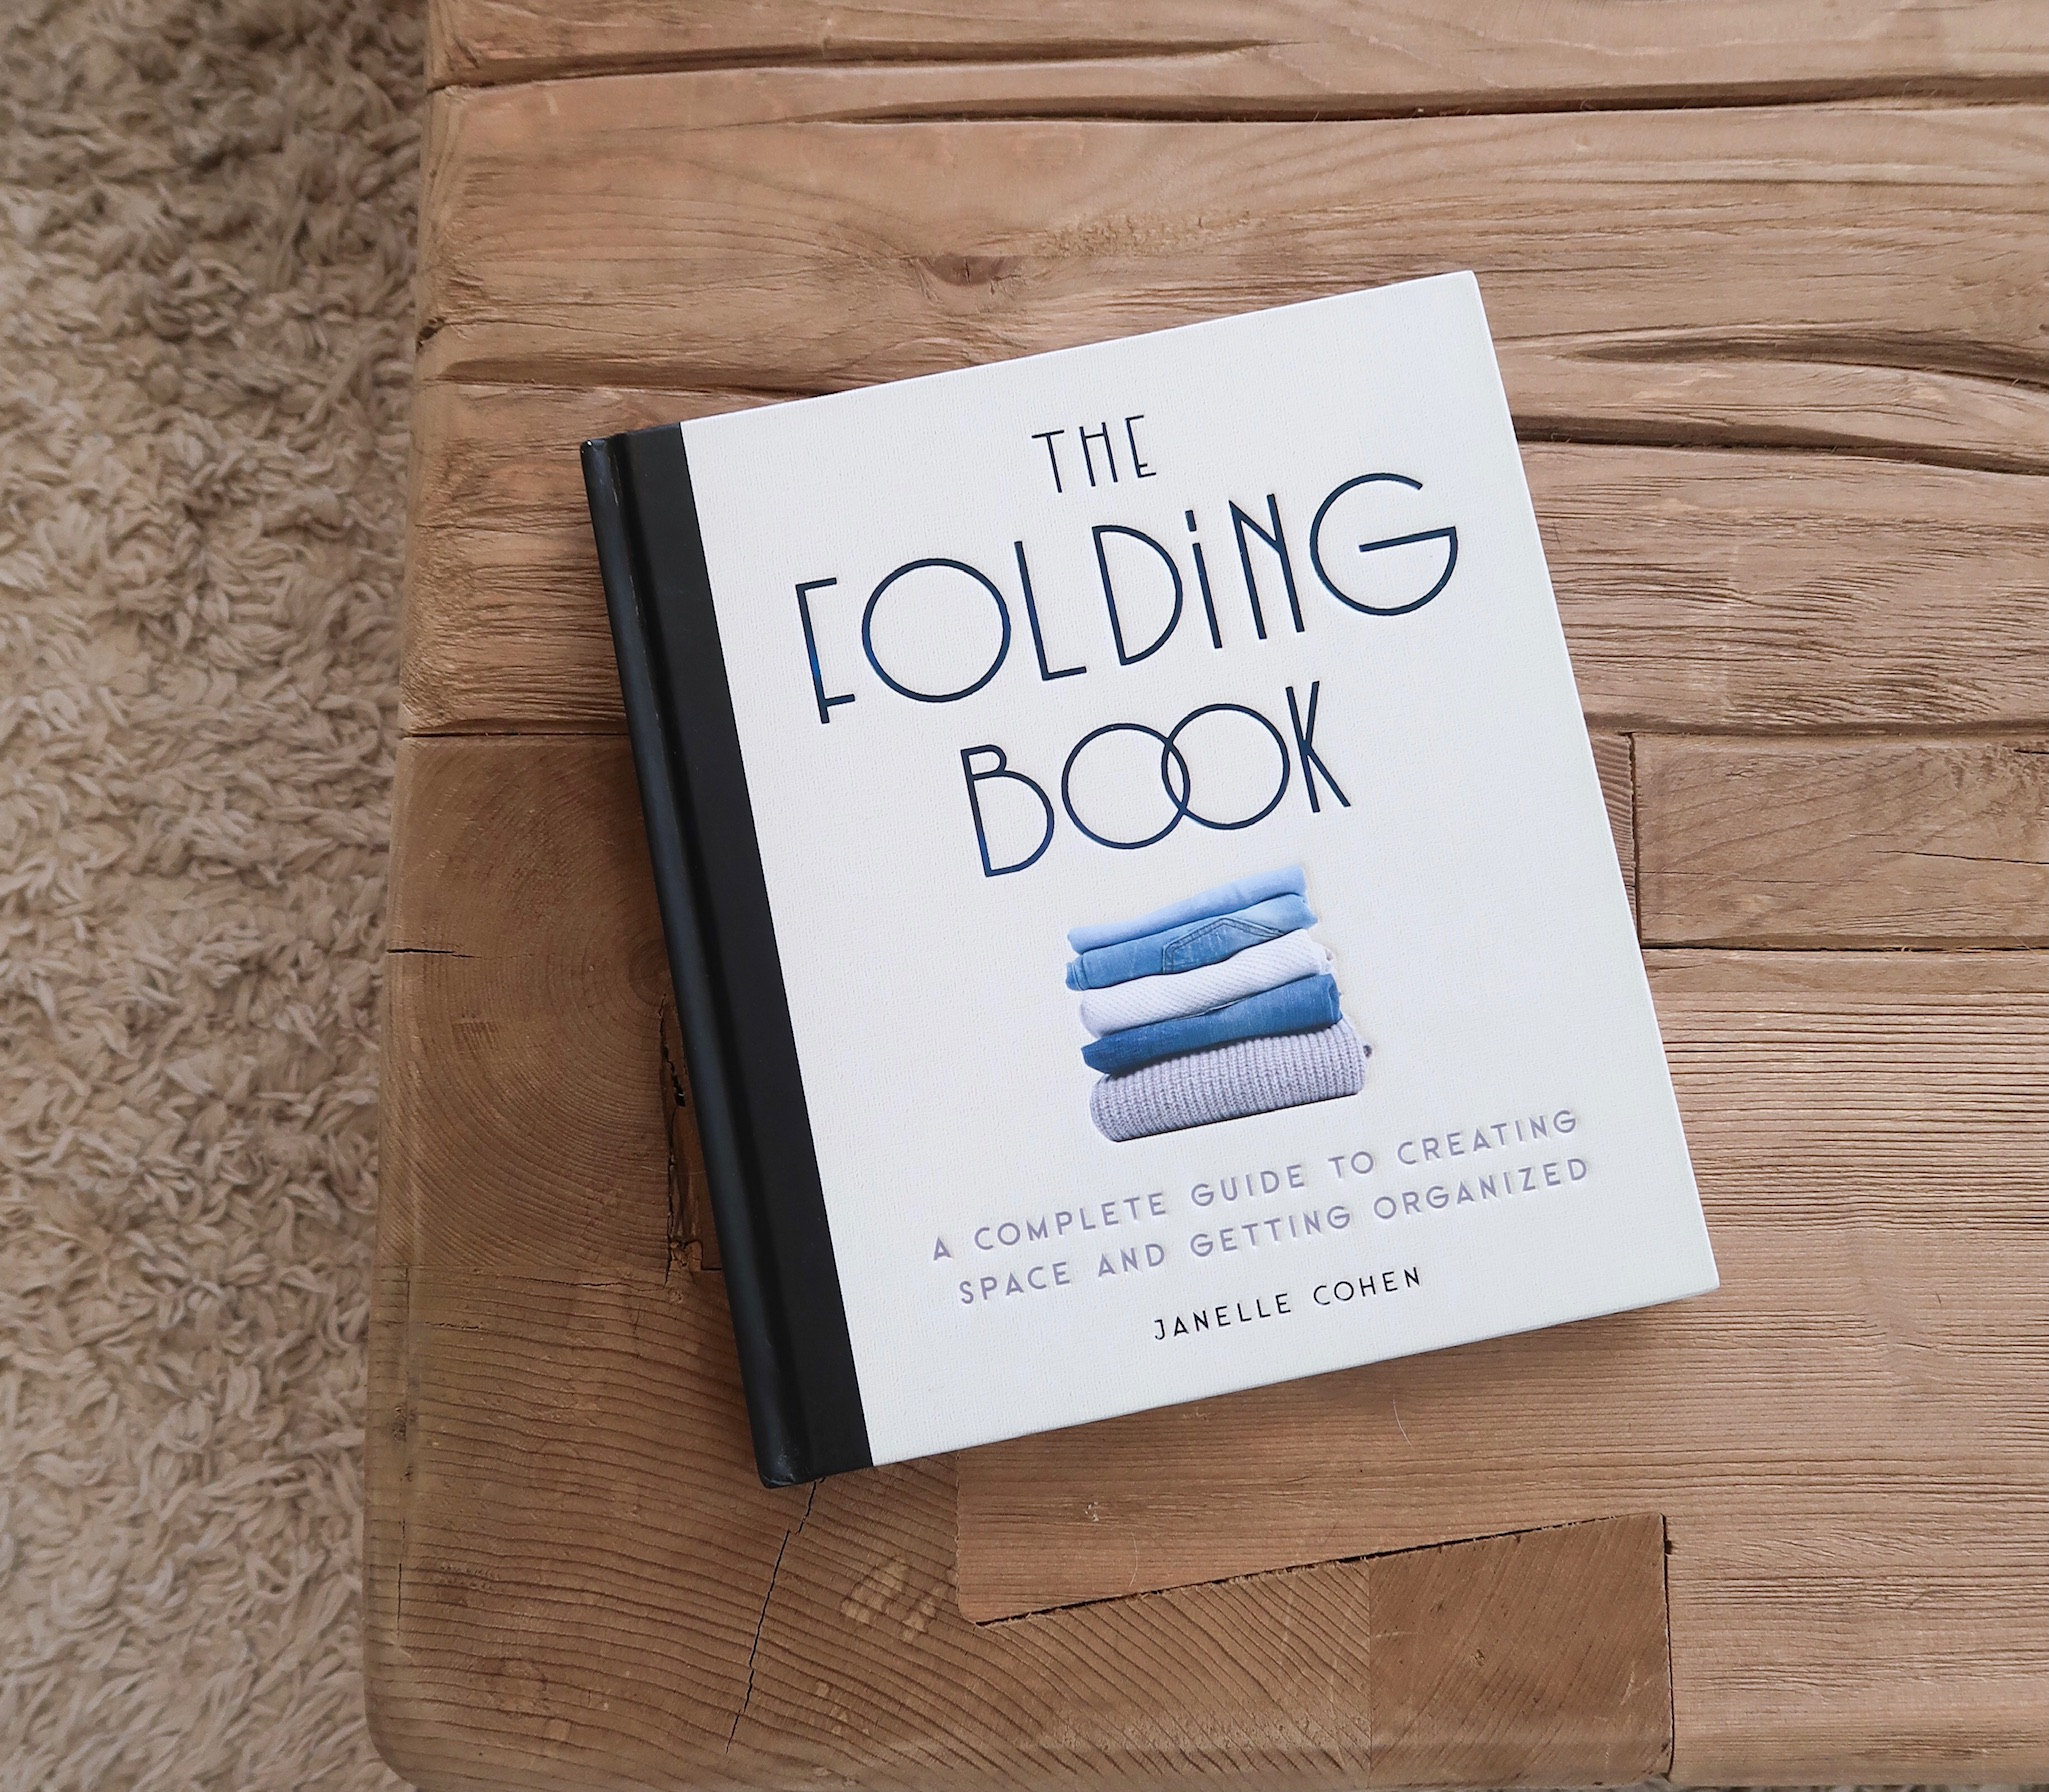 The folding book by janelle cohen